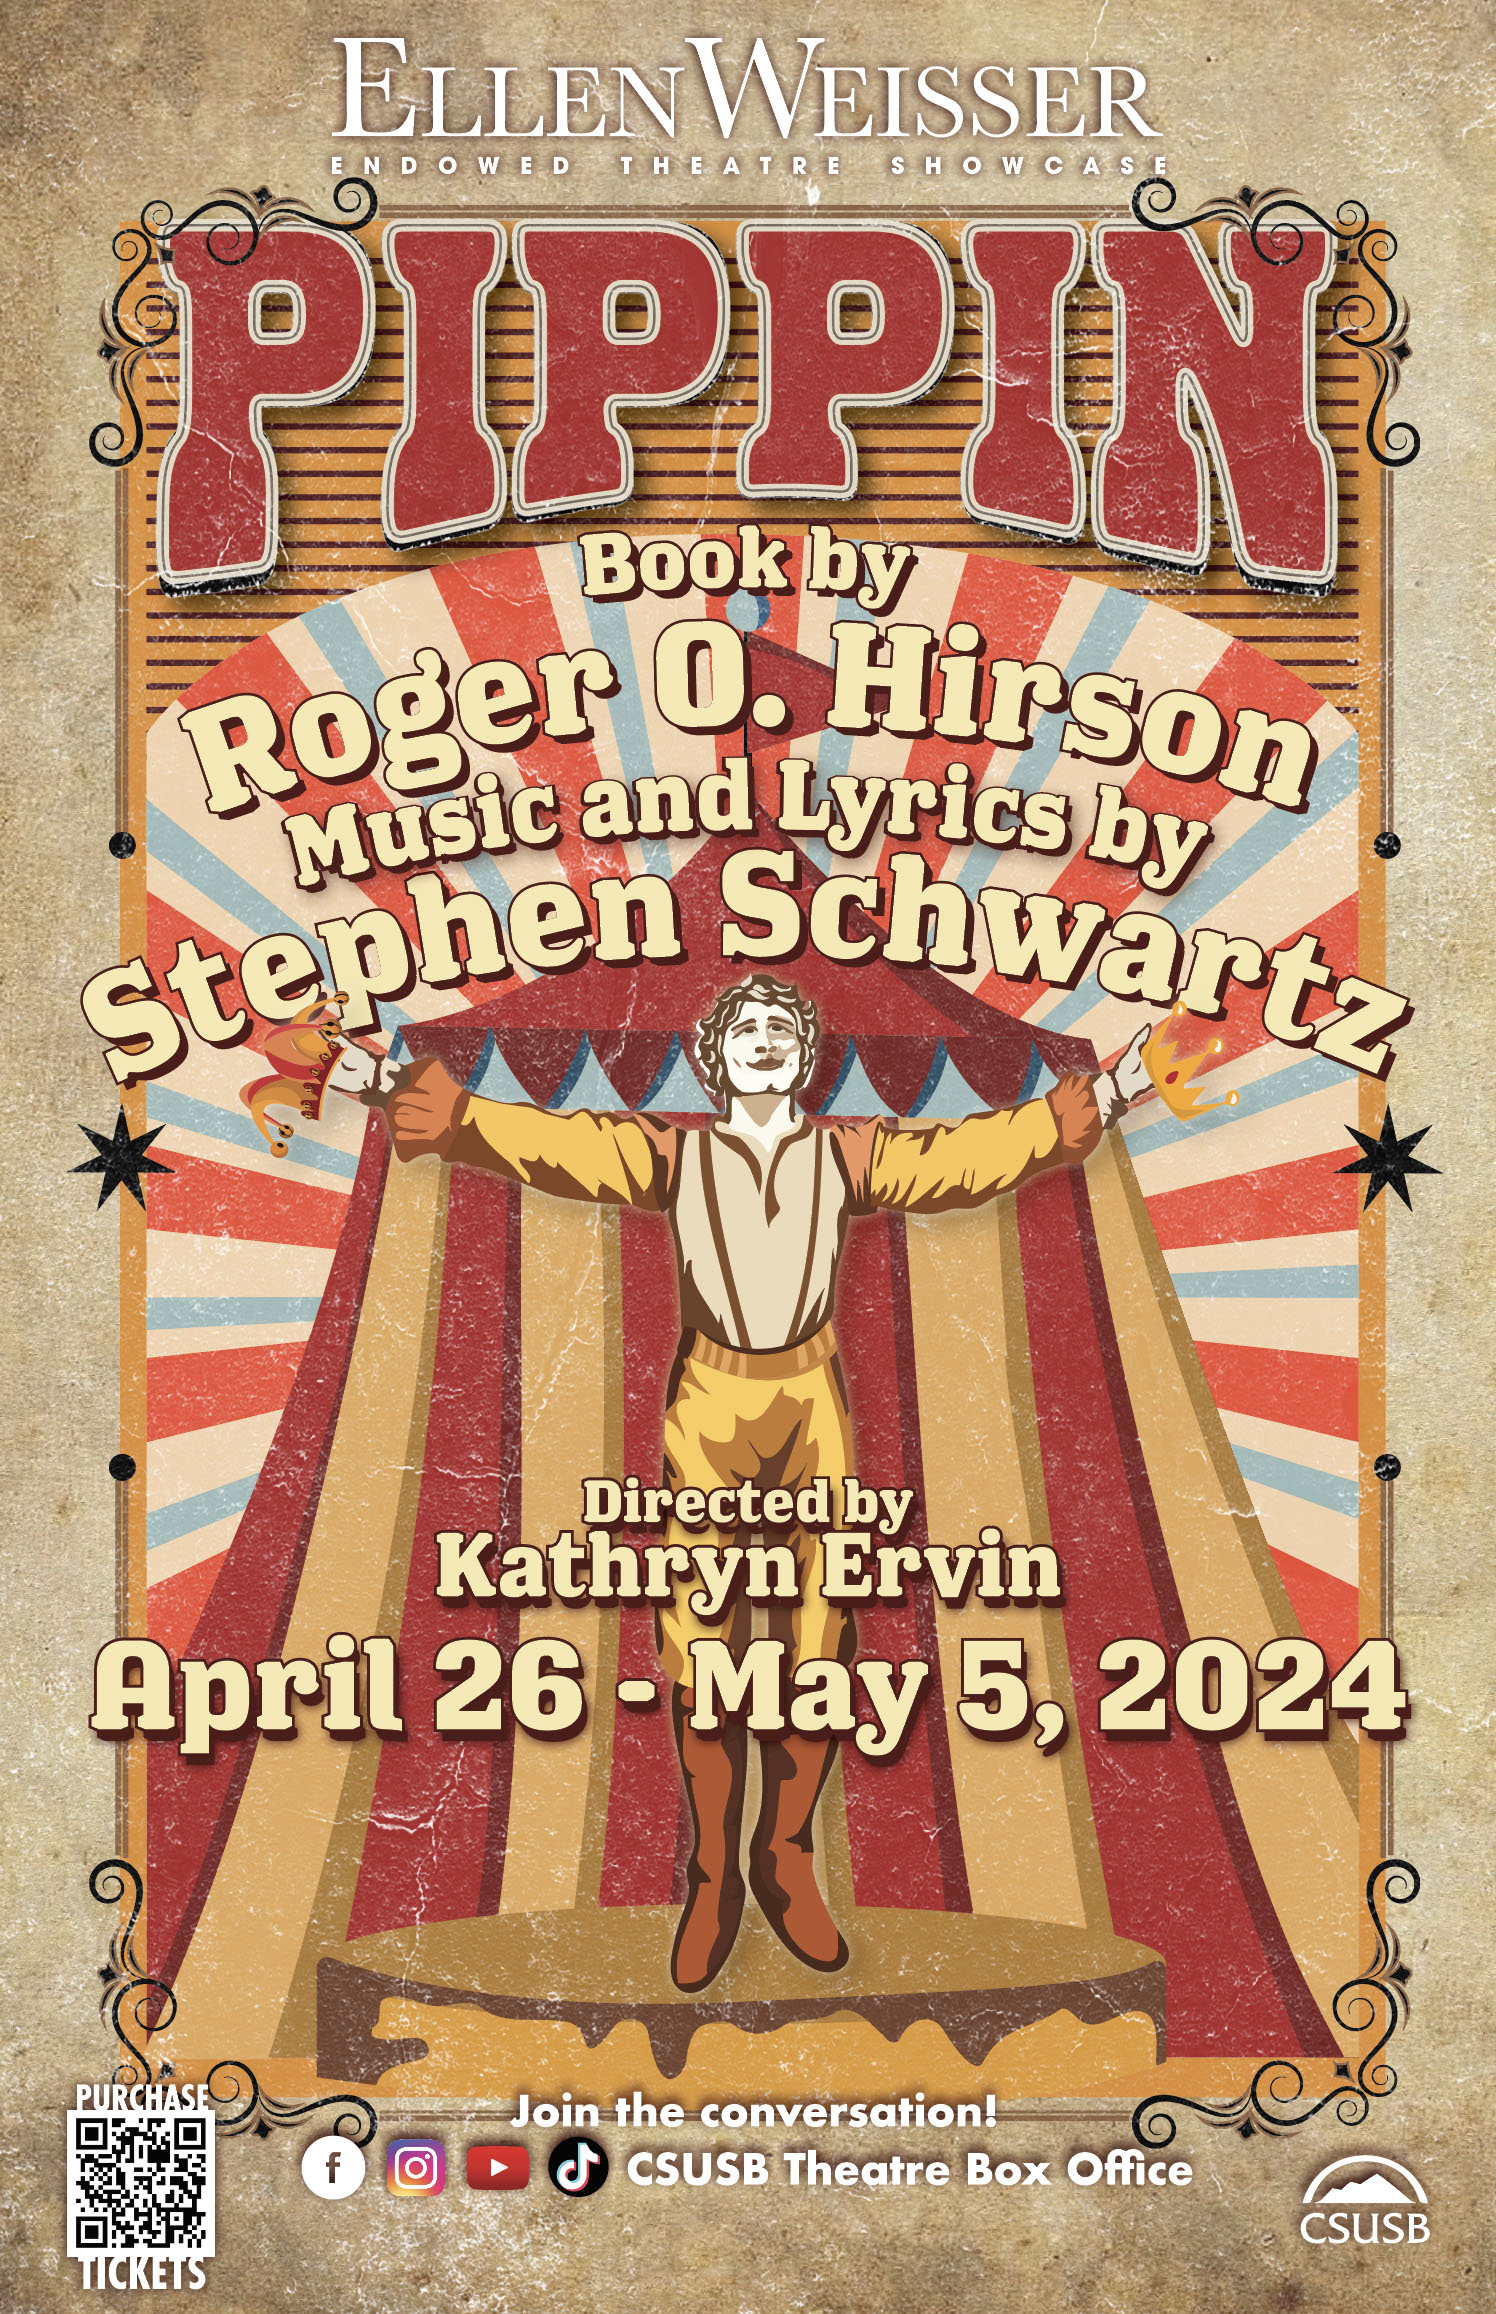 Pippin the musical Book by Roger O. Hirson; Music and Lyrics by Stephen Schwartz; Directed by Kathryn Ervin April 26 - May 5, 2024